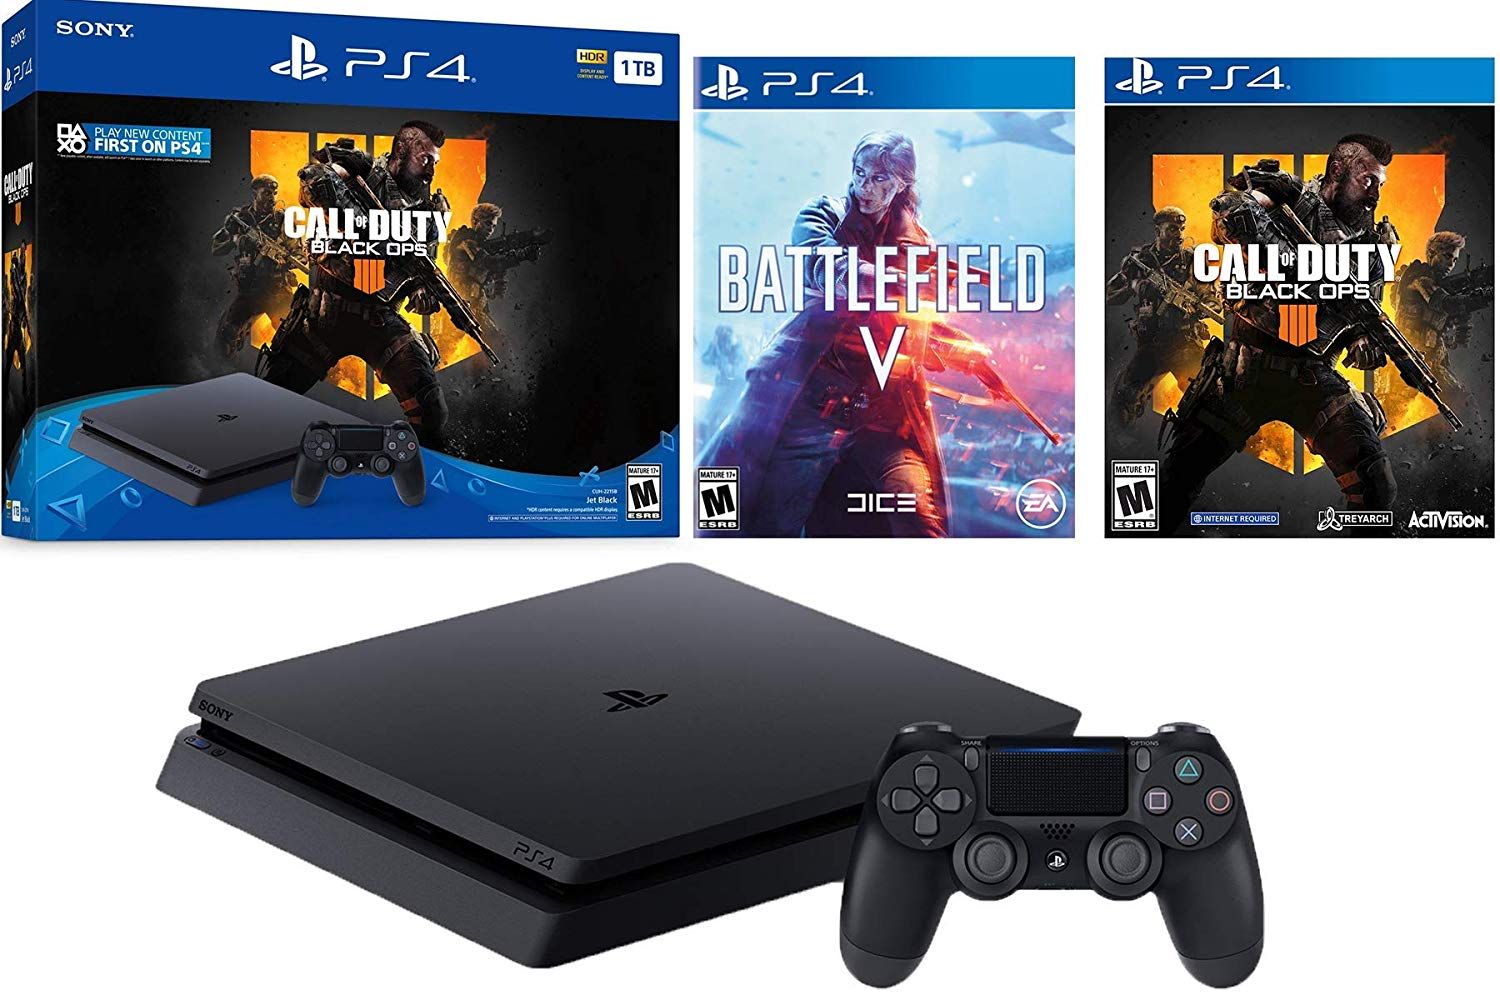 PlayStation 4 Call of Duty Black Ops 4 PS4 Slim Battlefield Bundle: Call of Duty Black Ops V and PlayStation PS4 Slim 1TB HDR Gaming Console with Dualshock 4 Wireless Controller Walmart.com